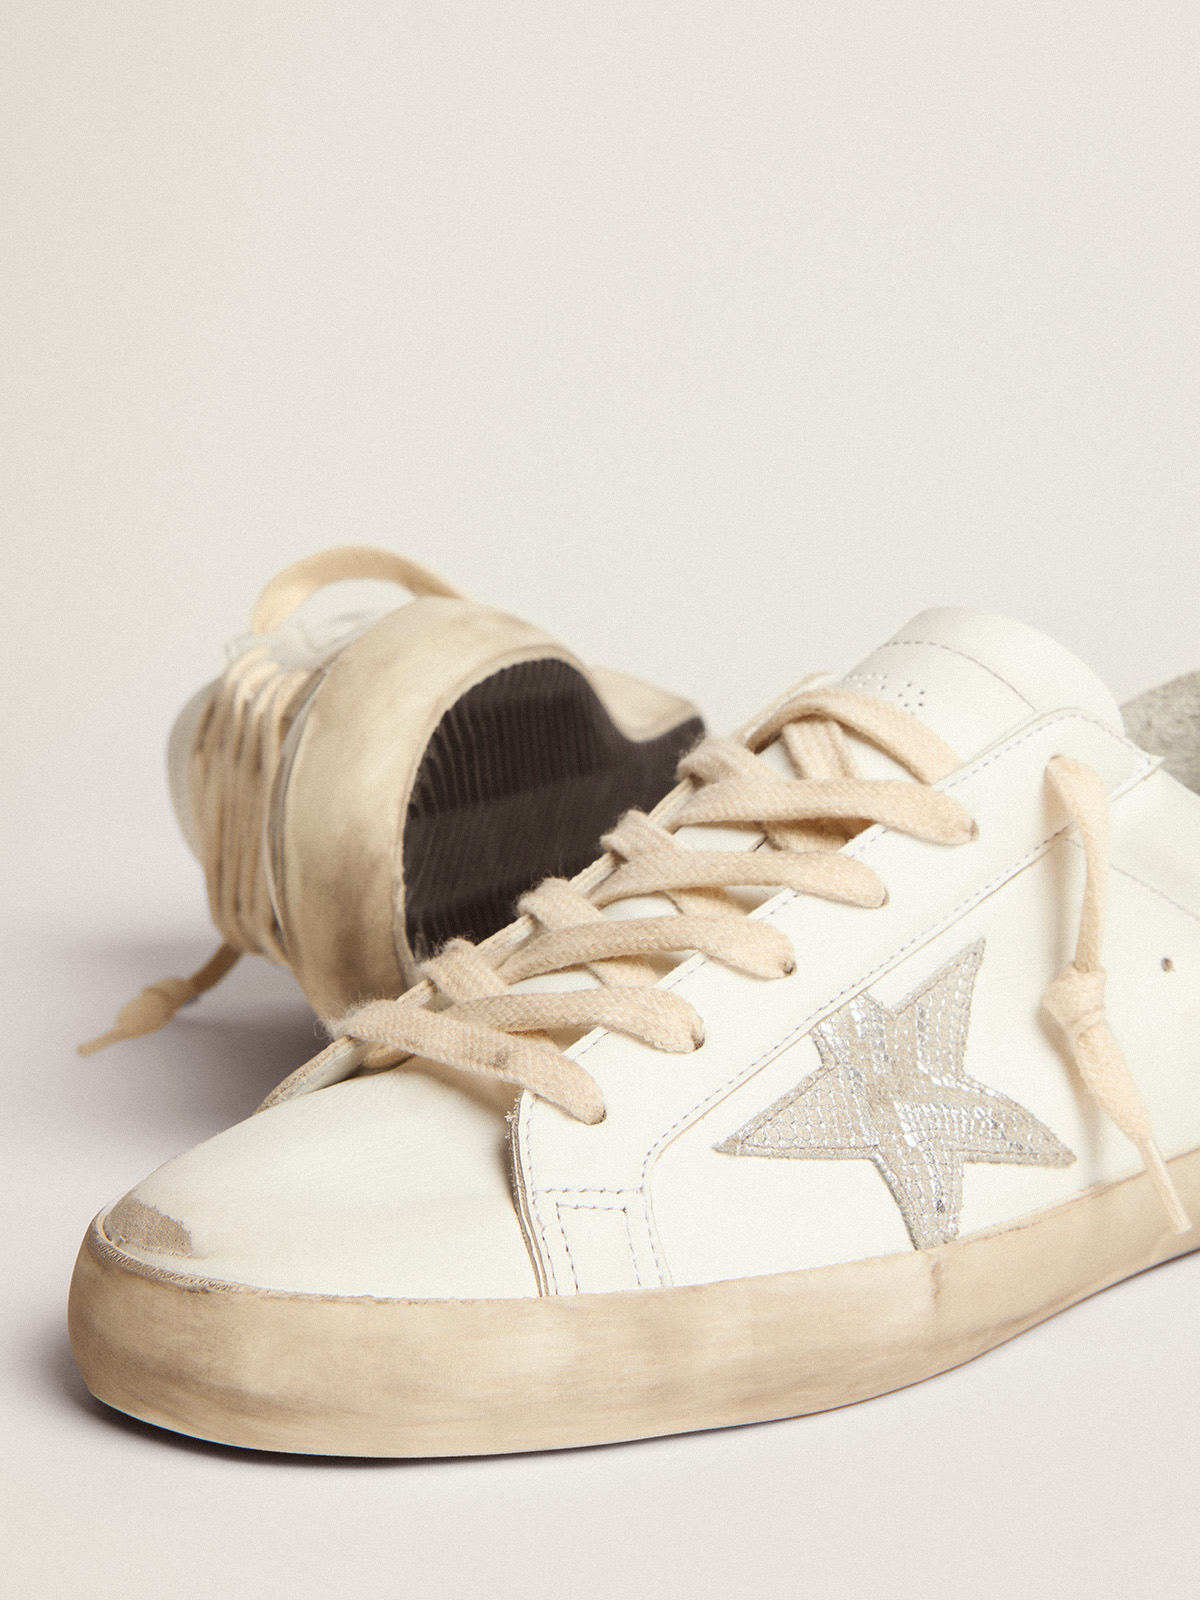 Women's Super-Star sneakers in silver leather